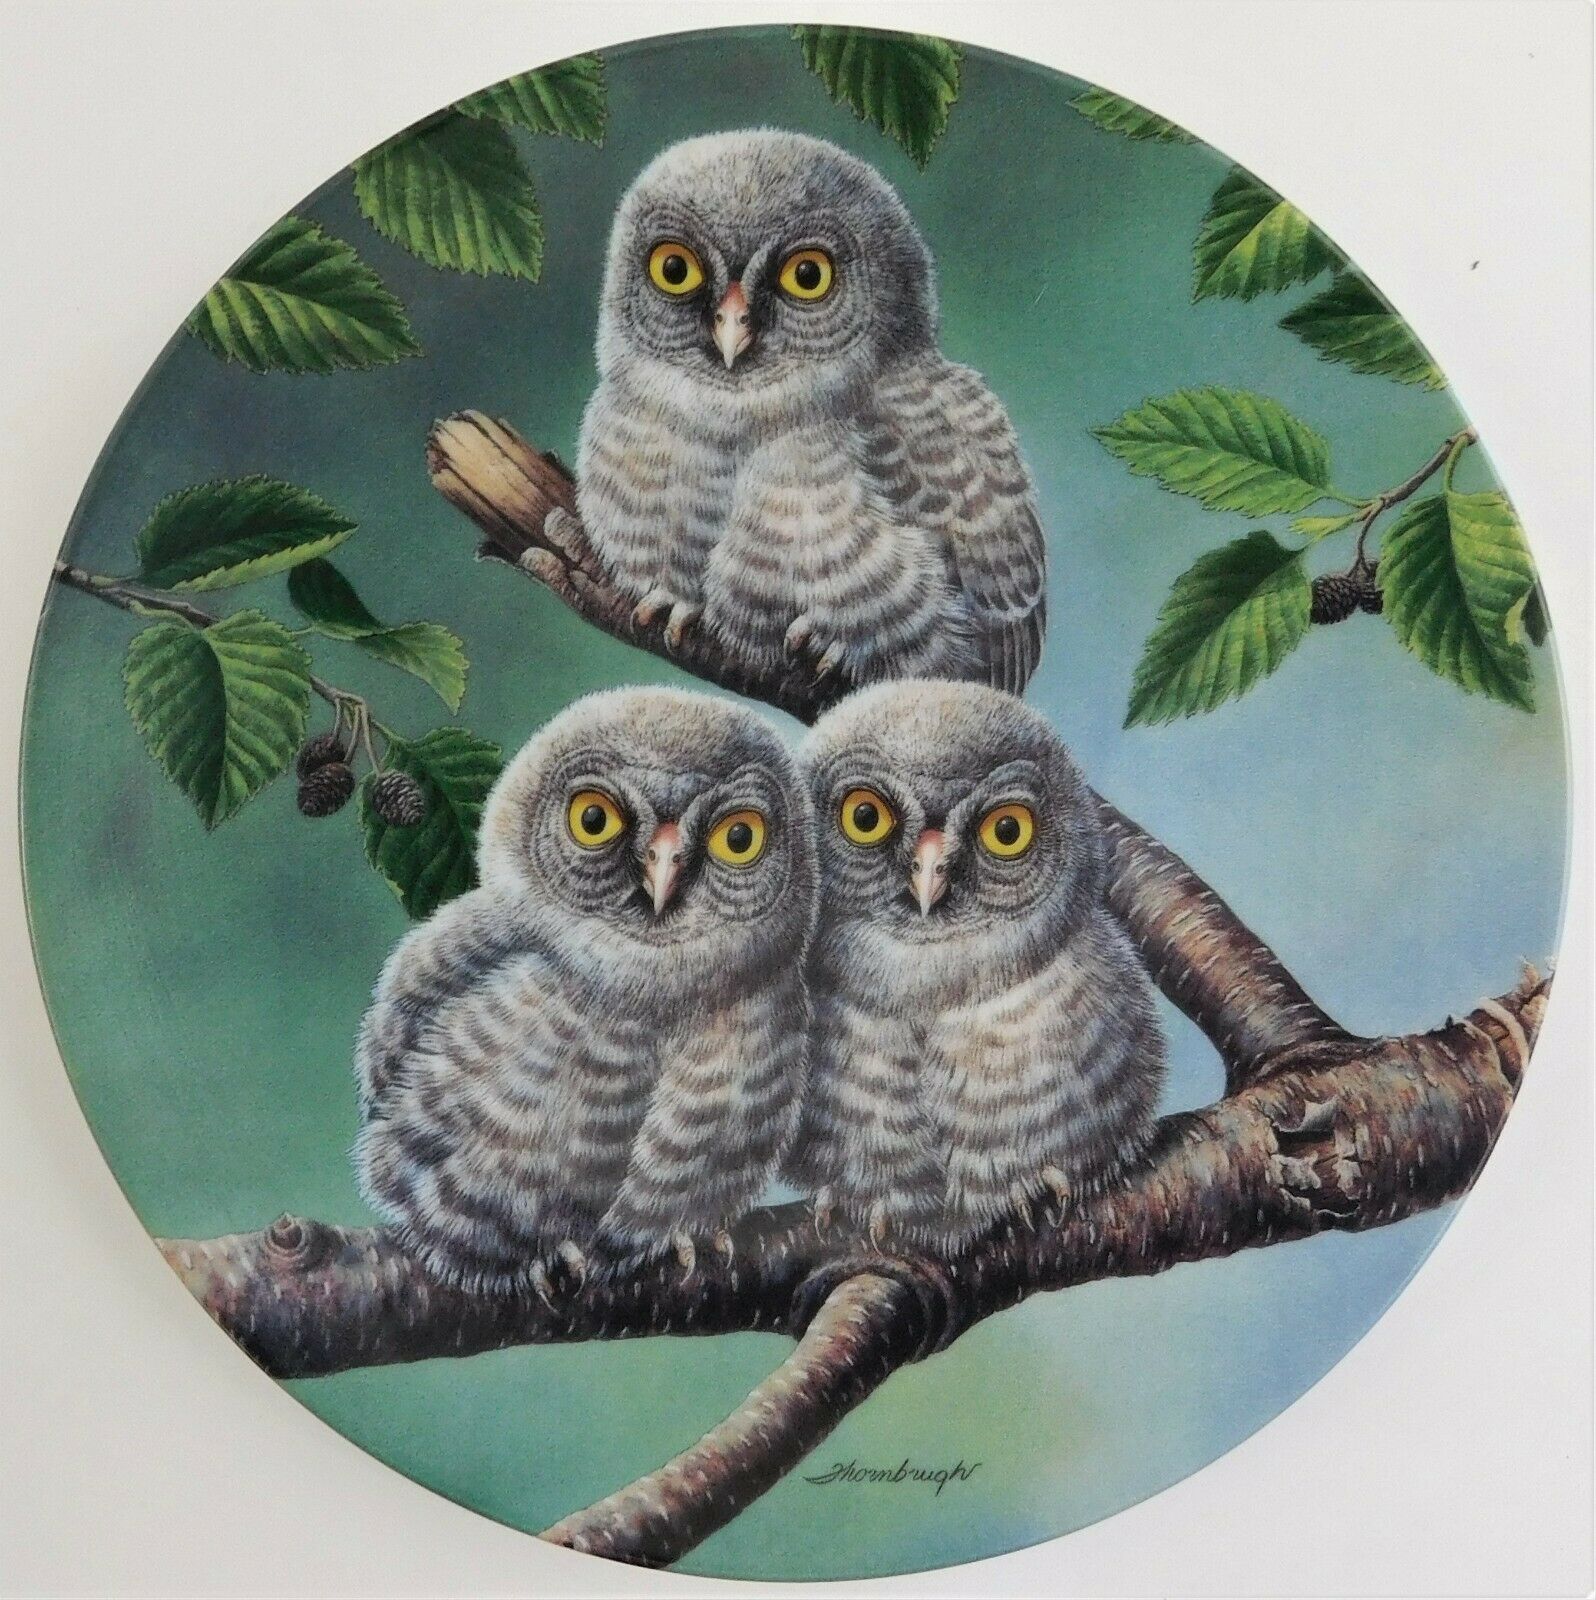 Primary image for Knowles Out on a Limb Great Gray Owls Plate Joe Thornbrugh Baby Owls #5 USA